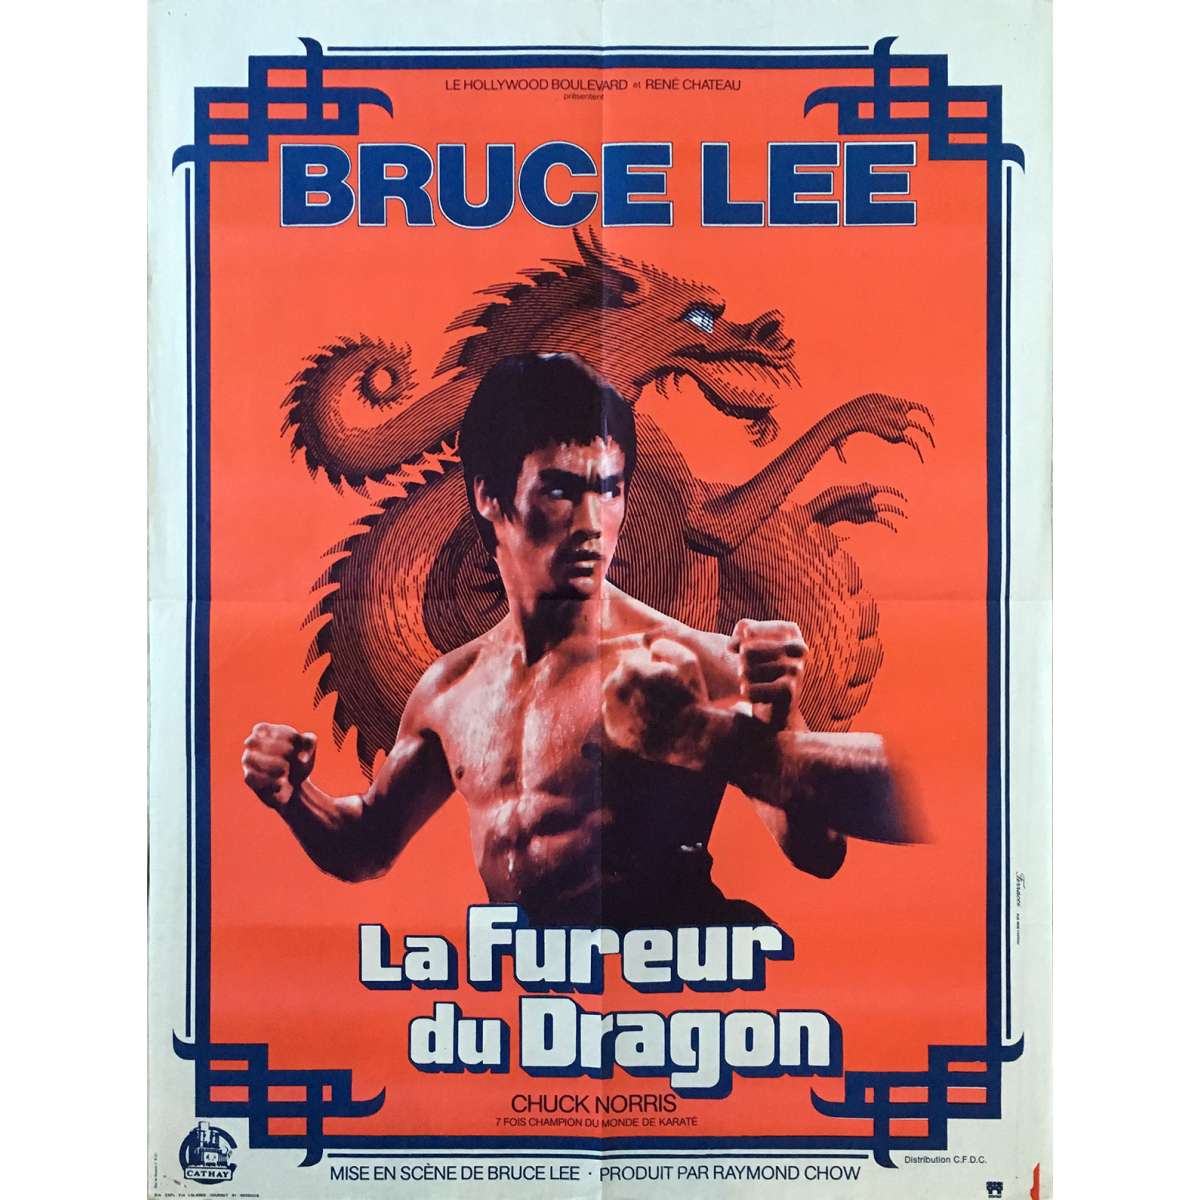 THE WAY OF THE DRAGON Movie Poster 23x32 in.